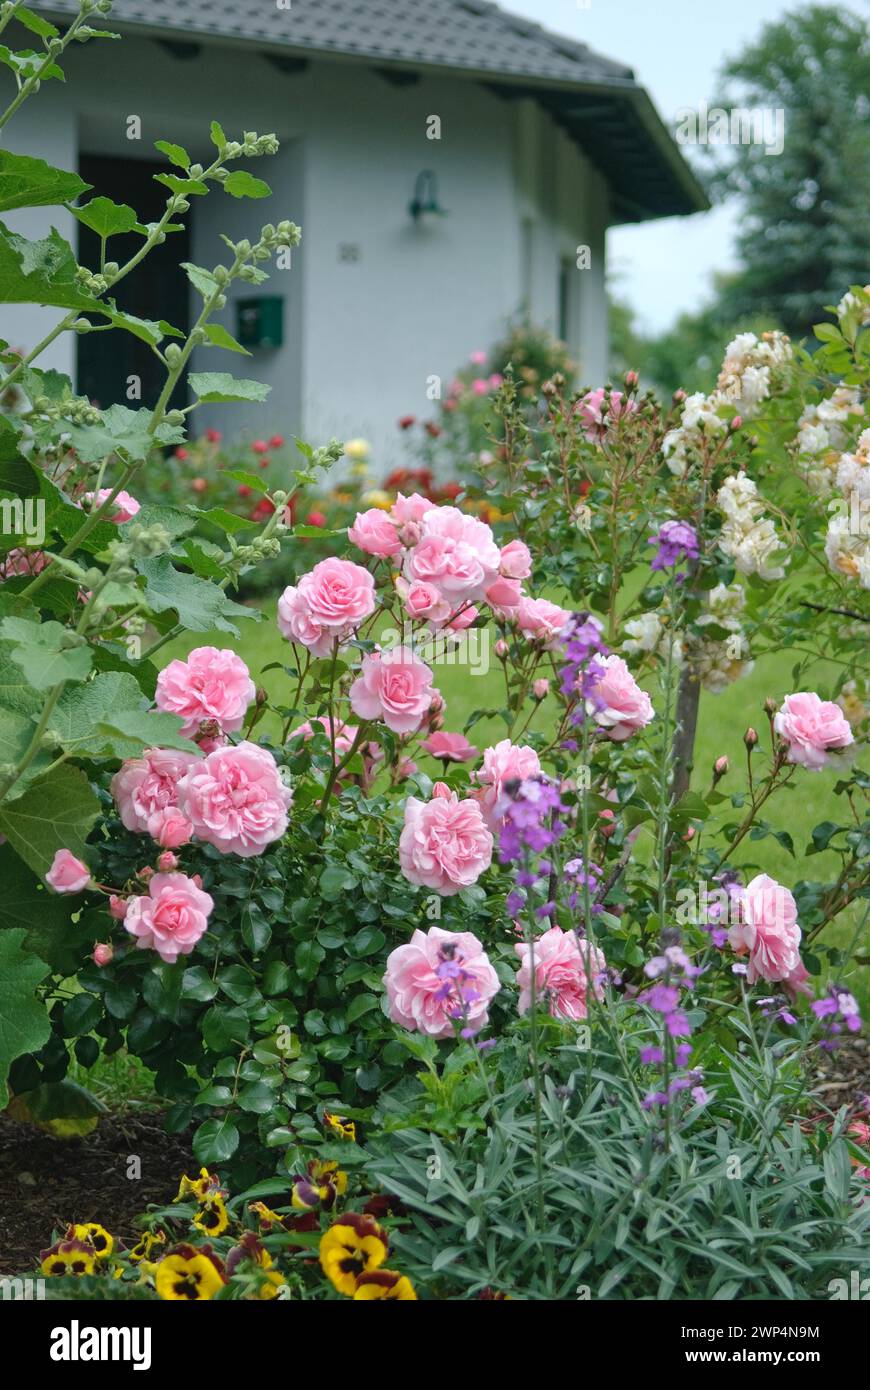 Ground cover roses (Rosa 'Bonica 82'), Steinfurth, 81 Stock Photo